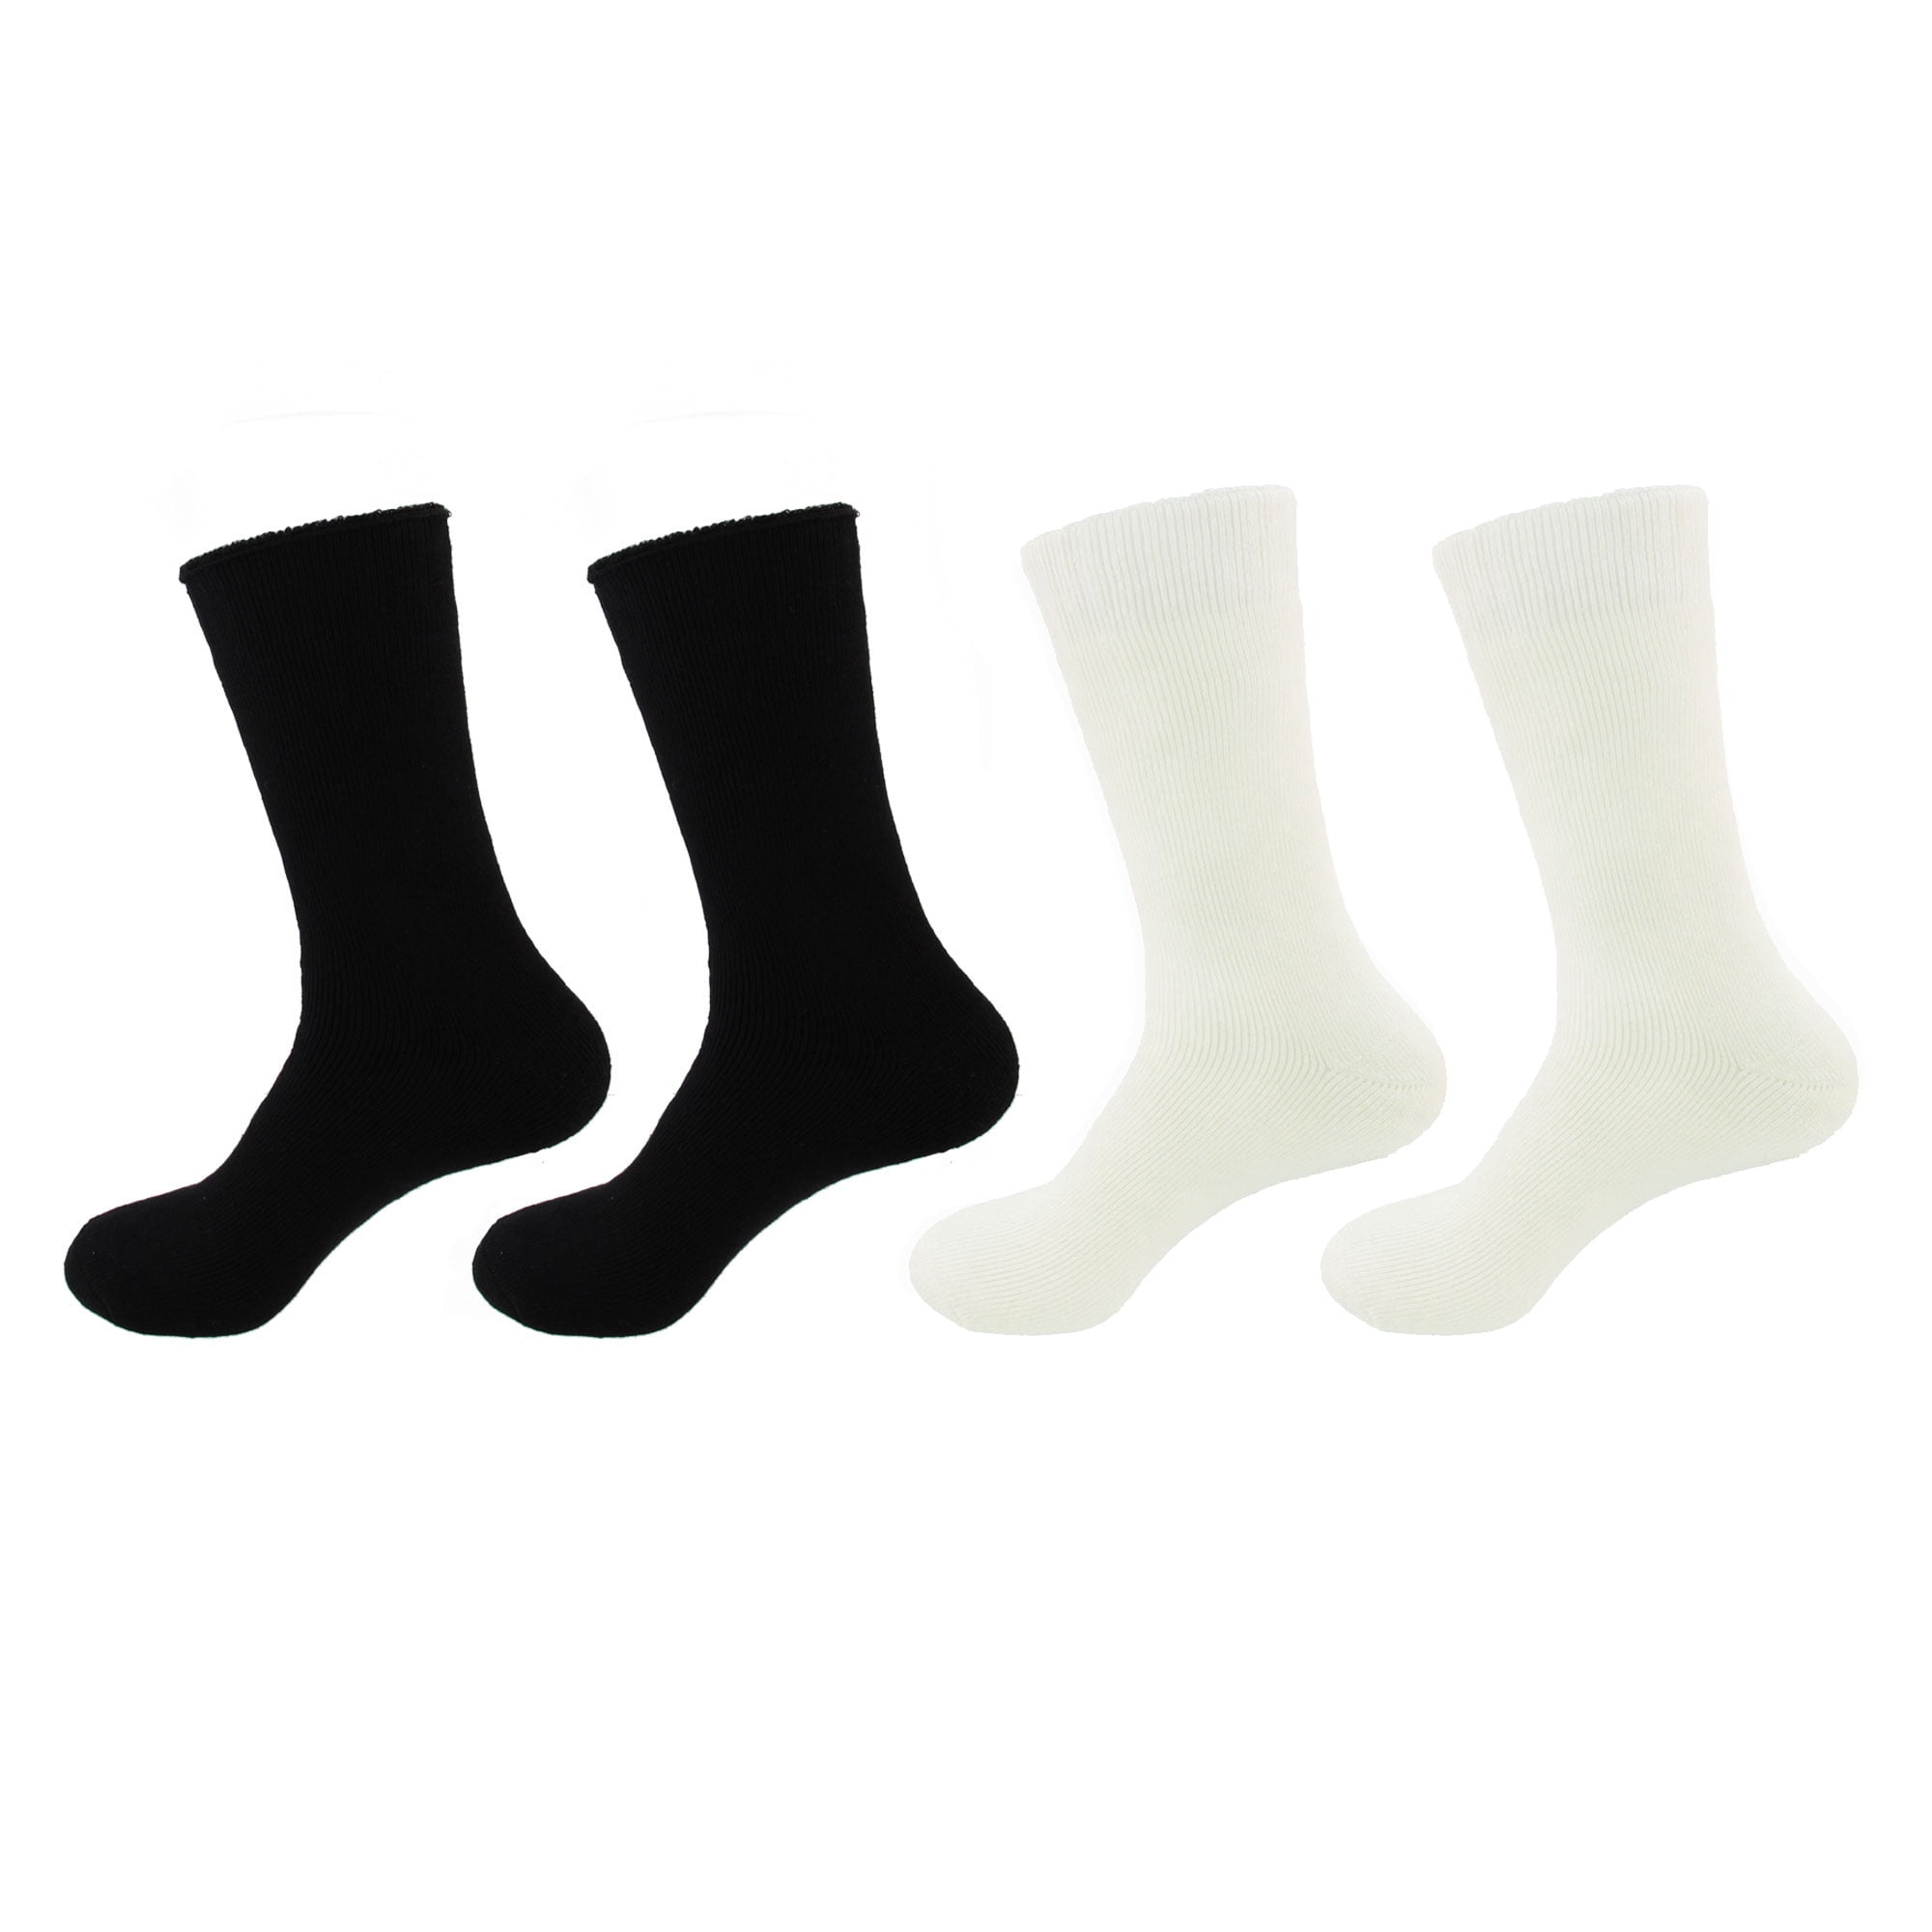 Mens Rayon from Bamboo Fiber Ultra Breathable Wicking Supported Toe and Heel Crew Socks